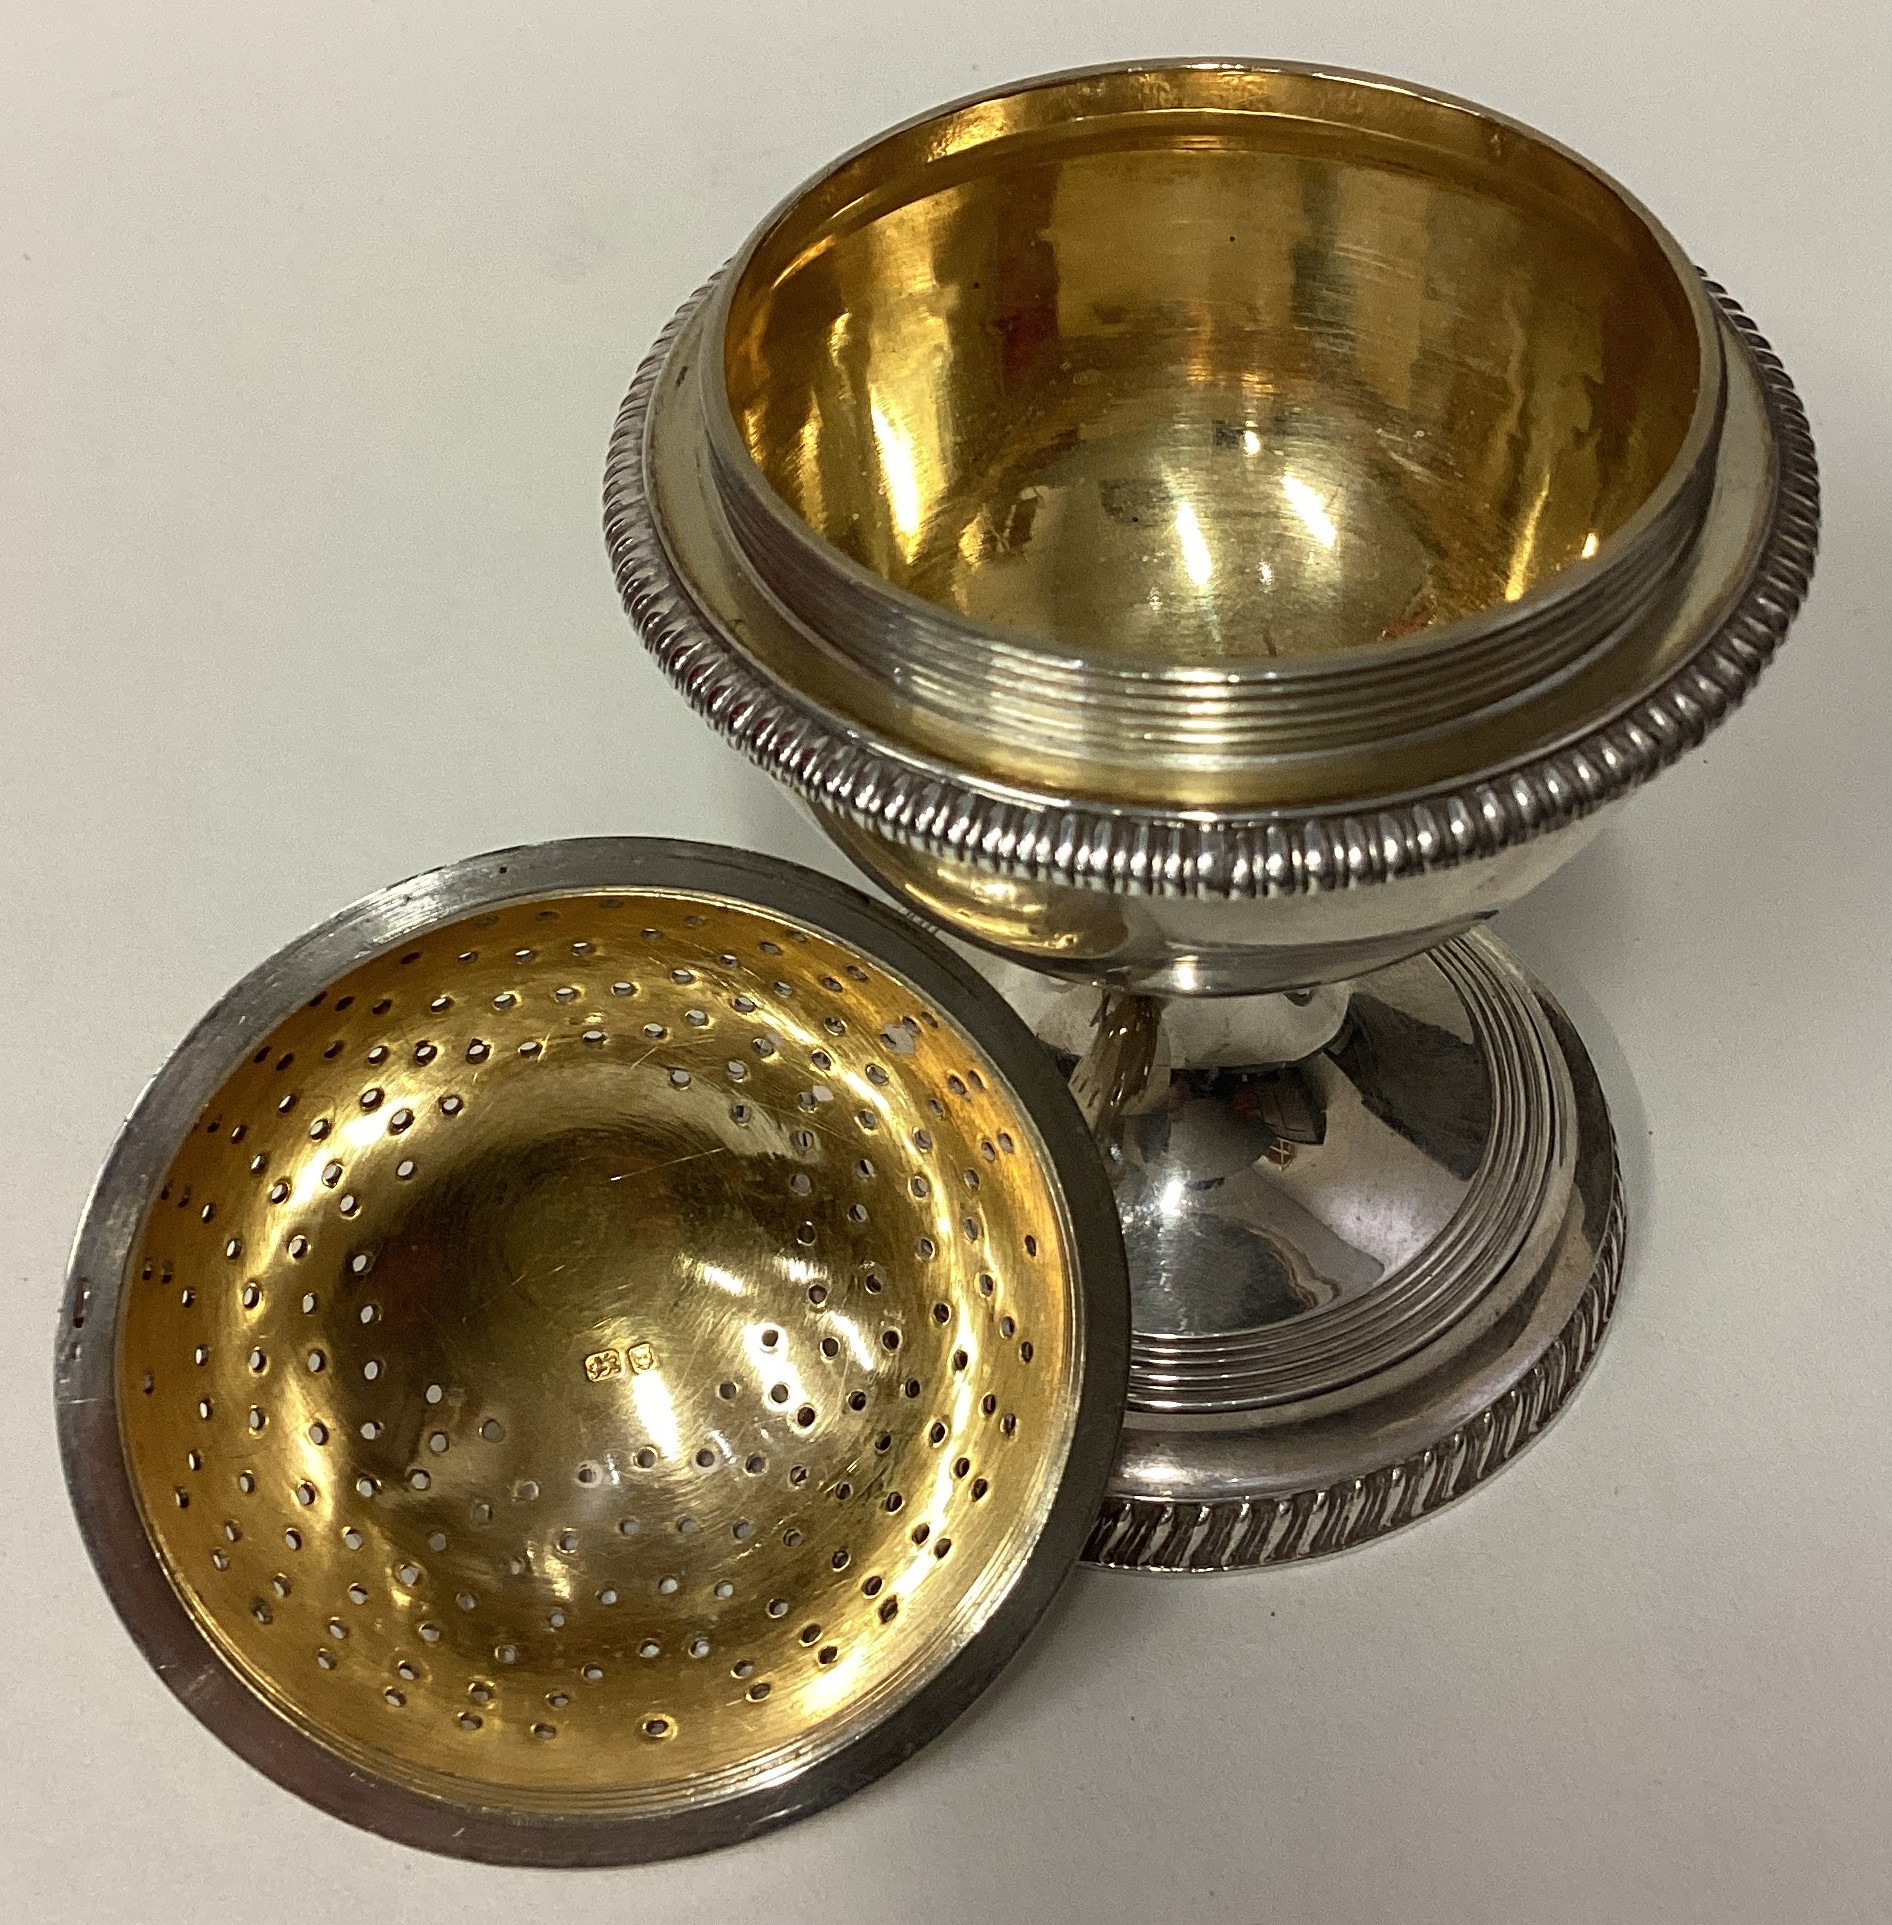 A rare silver sugar caster with screw-top lid. - Image 3 of 3